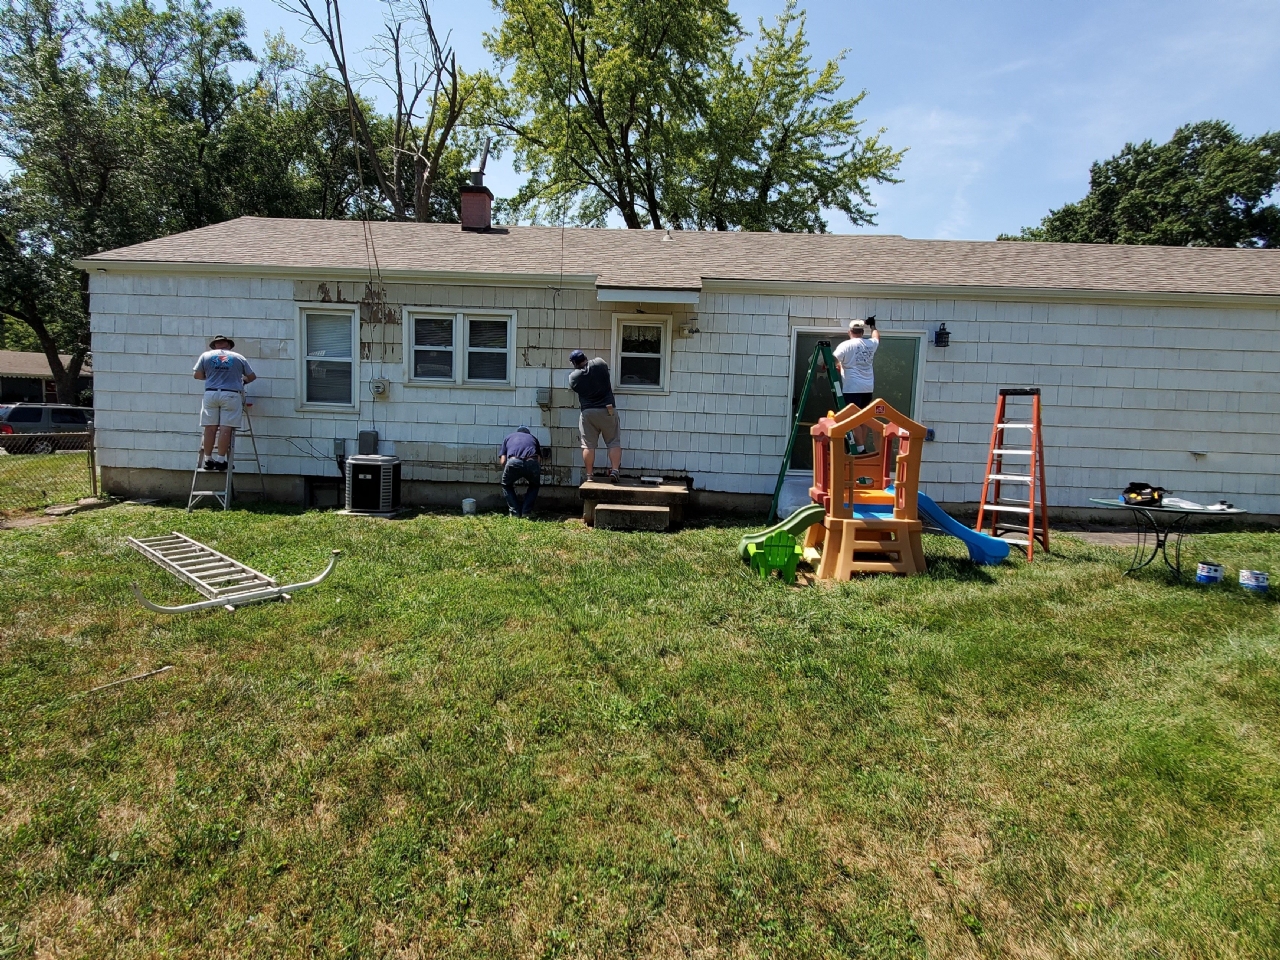 Post 5789 conducted a Veterans Service project on August 22, 2020.  A veterans daughter, who is an Auxiliary member and her husband were involved a terrible motorcycle accident.  They are both laid up with multiple major injuries and have a long recovery ahead of them.  The Comrades of VFW Post 5789 came together and scrapped and primed their house on August 22, 2020.